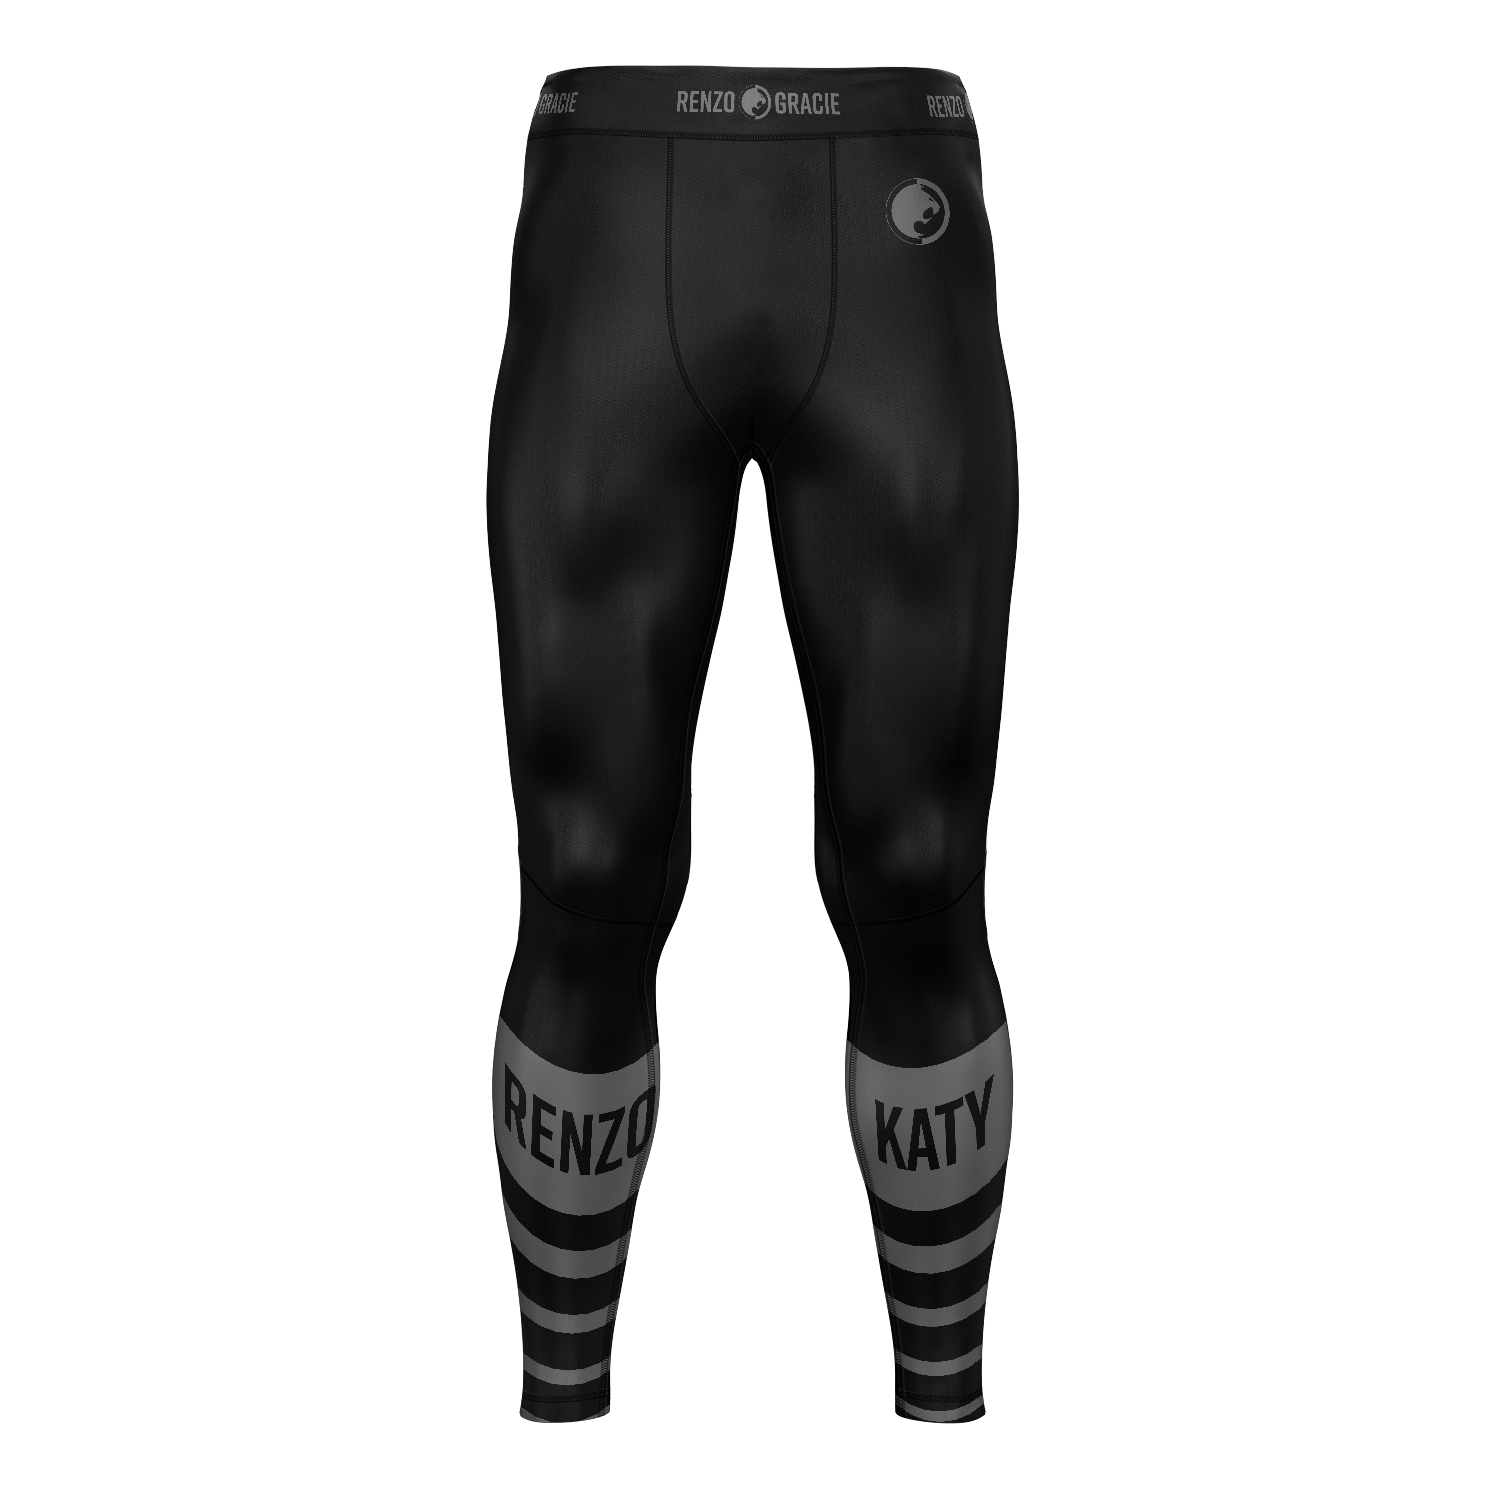 Renzo Gracie Katy men's grappling tights Standard Issue, black and grey